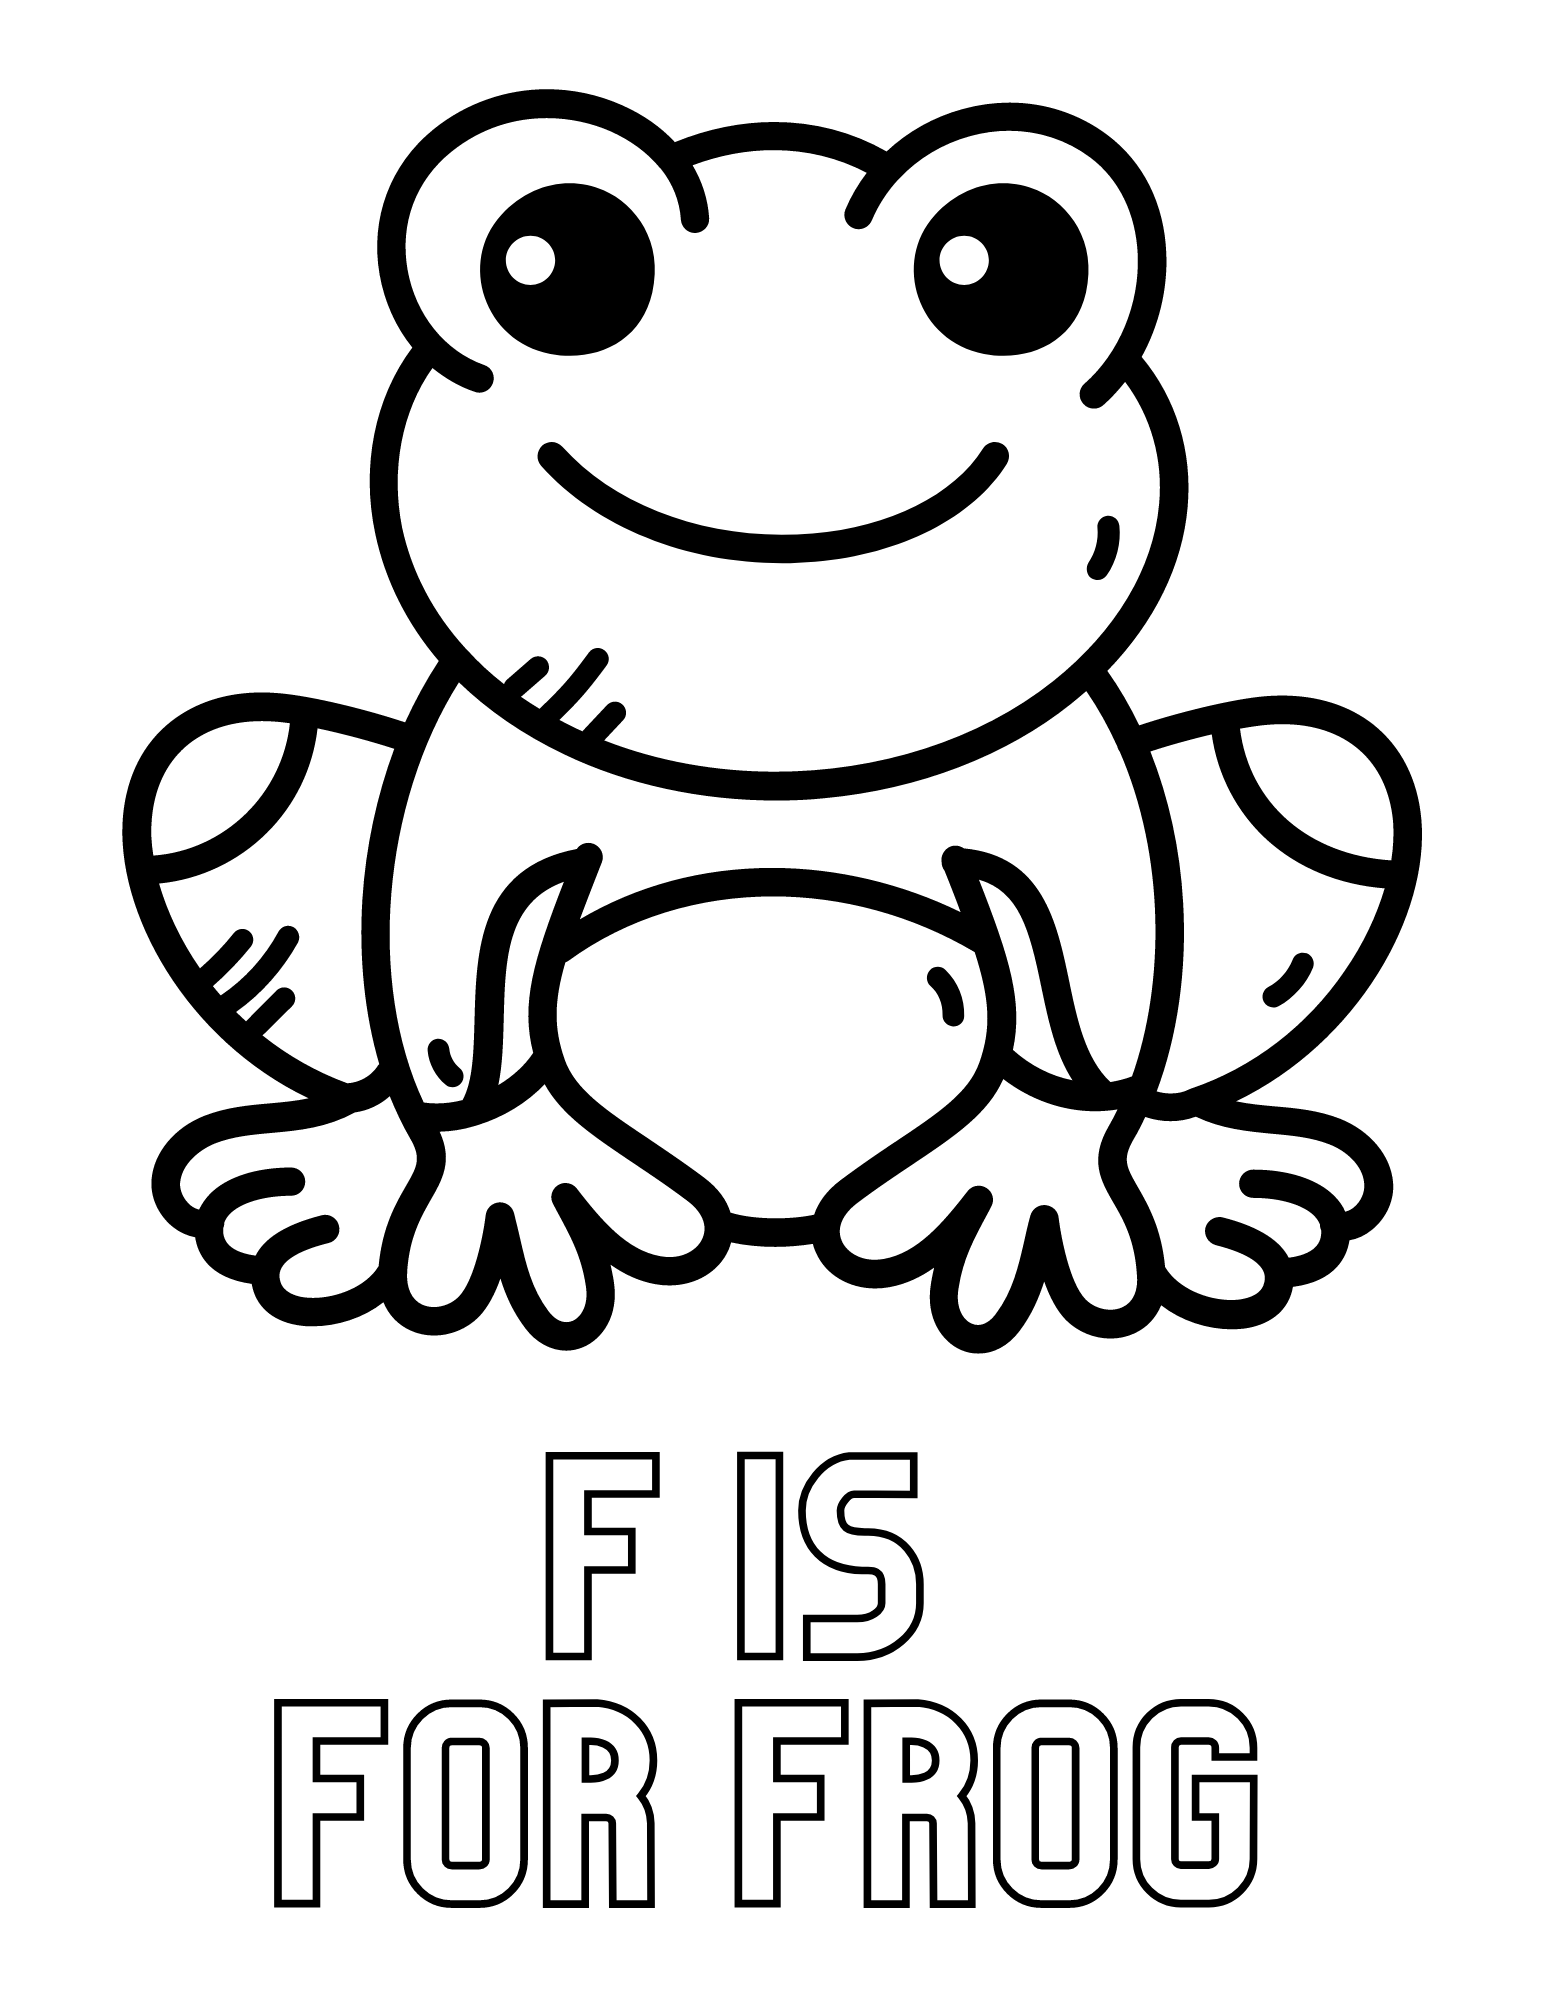 Fun frog facts and free frog coloring pages